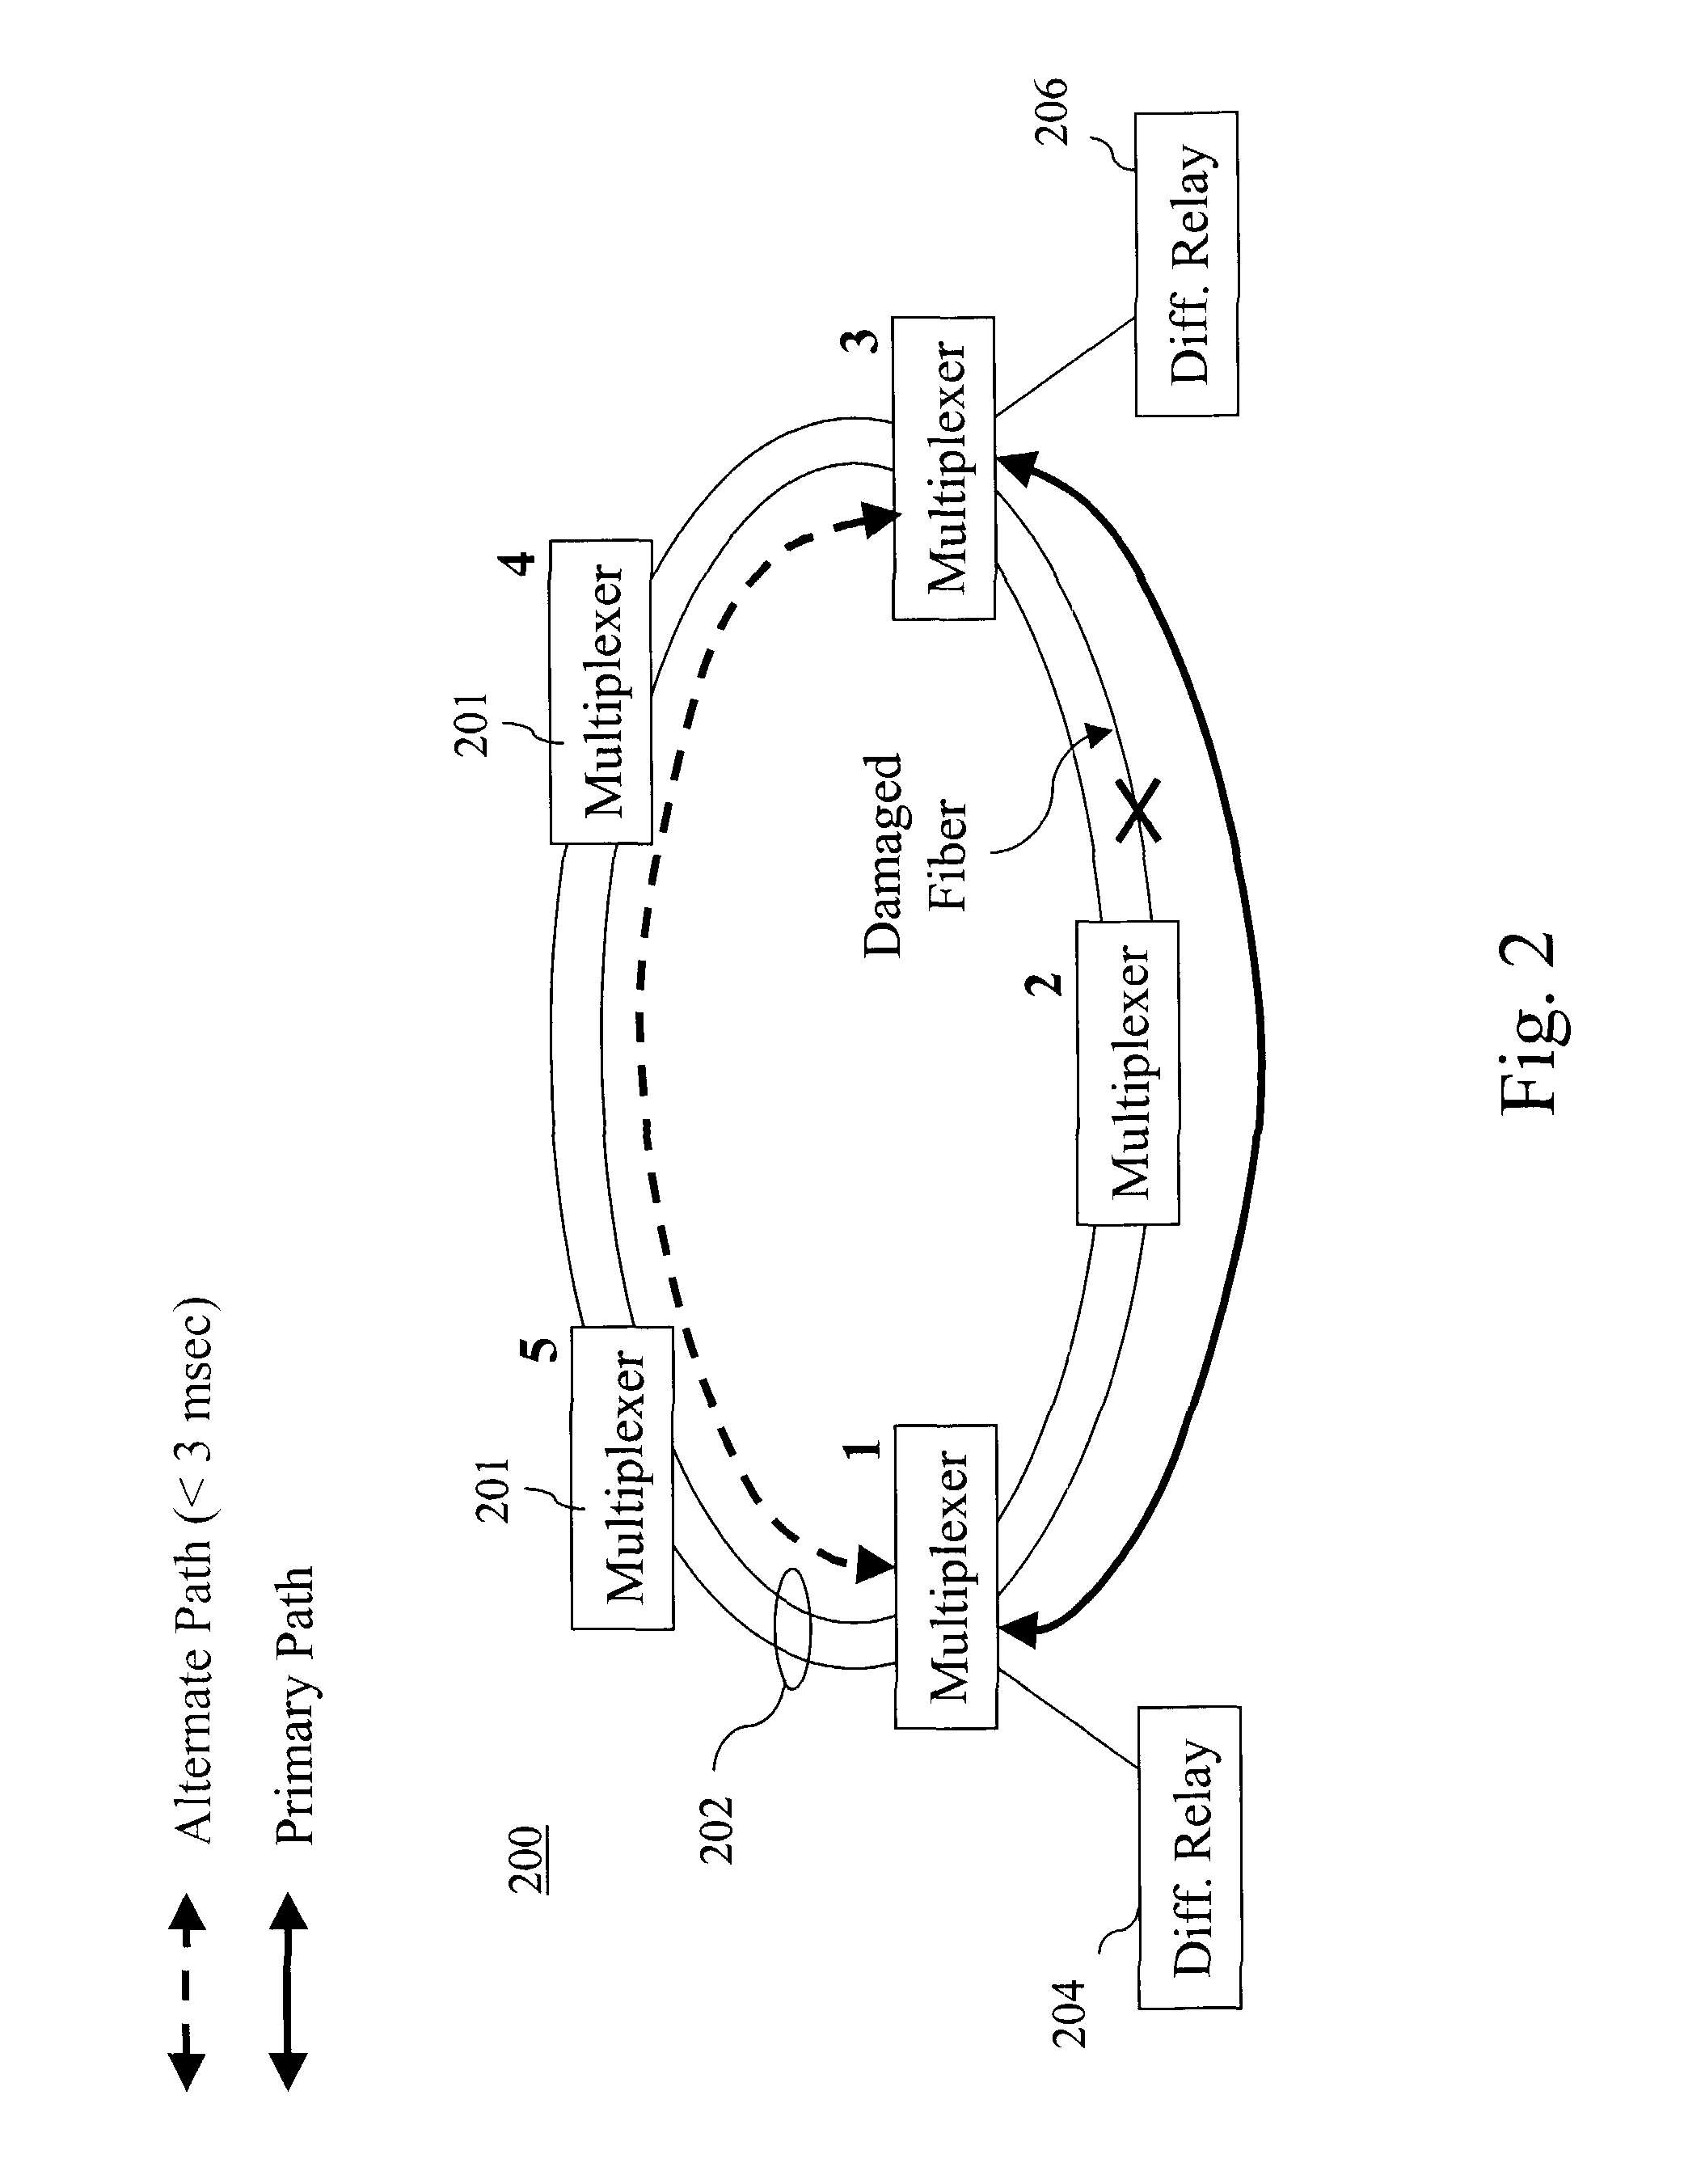 Method and system for communications channel delay asymmetry compensation using global positioning systems